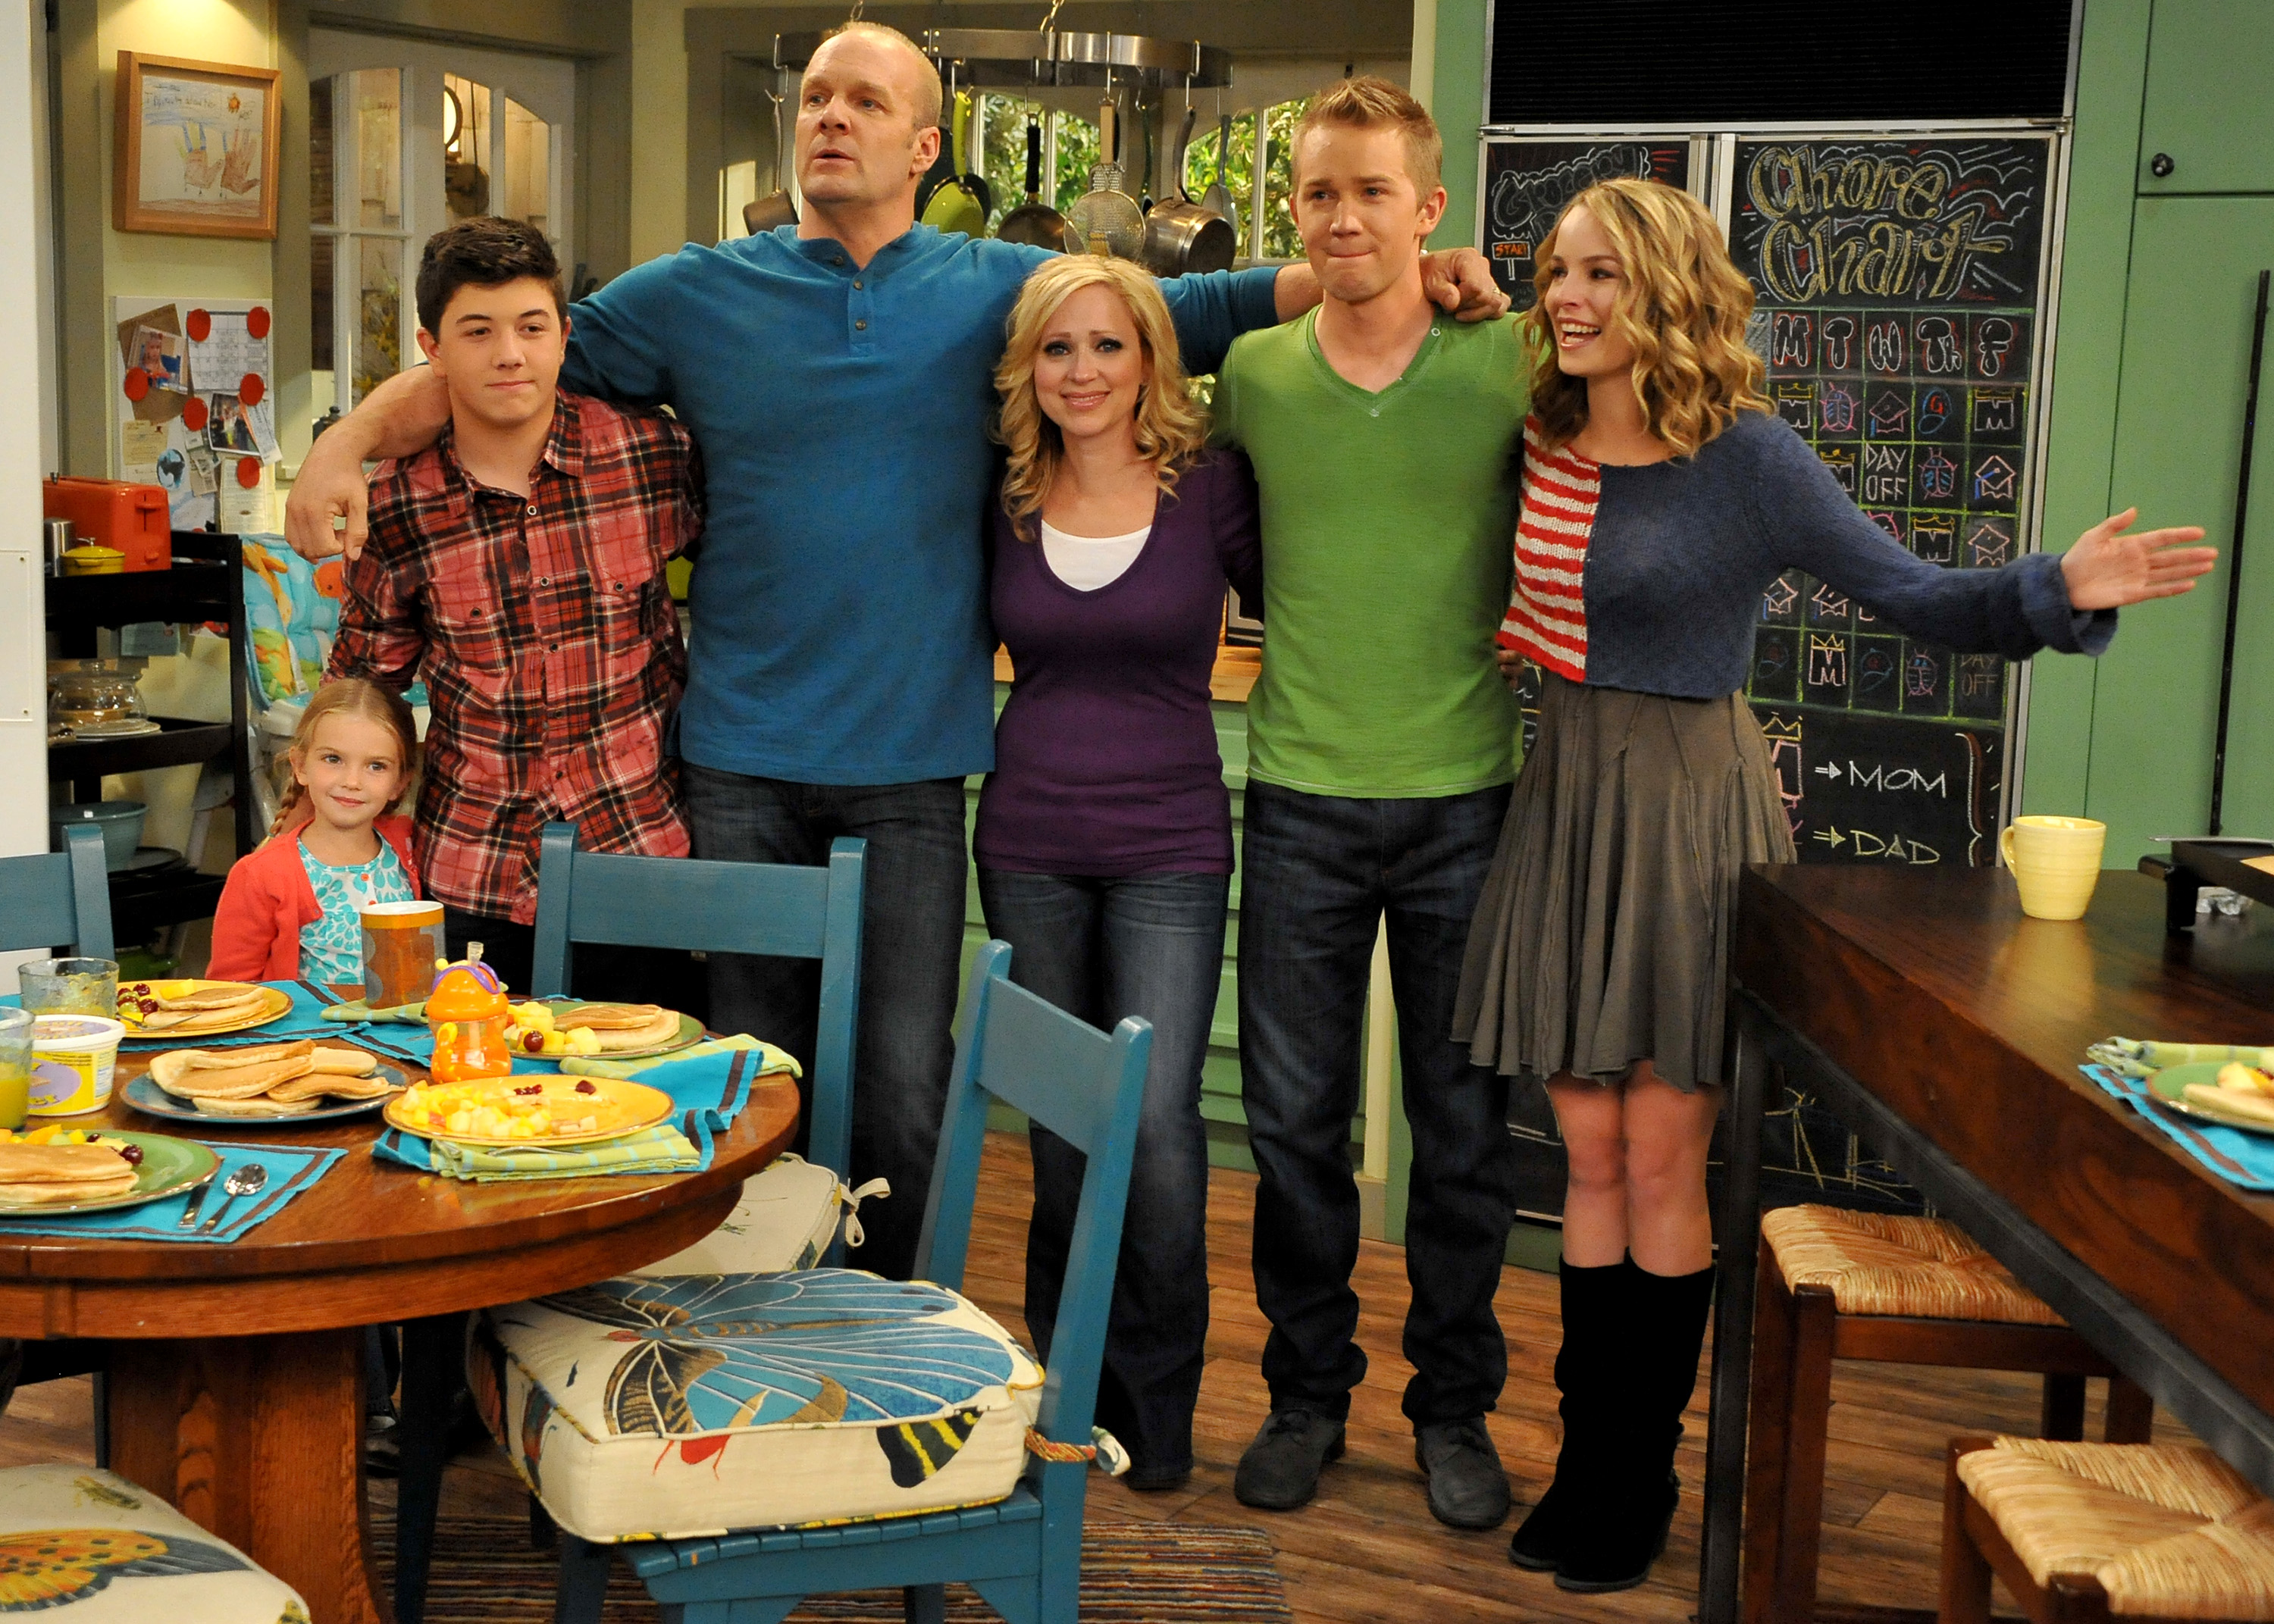 Why Did 'Good Luck Charlie' End? Here's the Real Reason